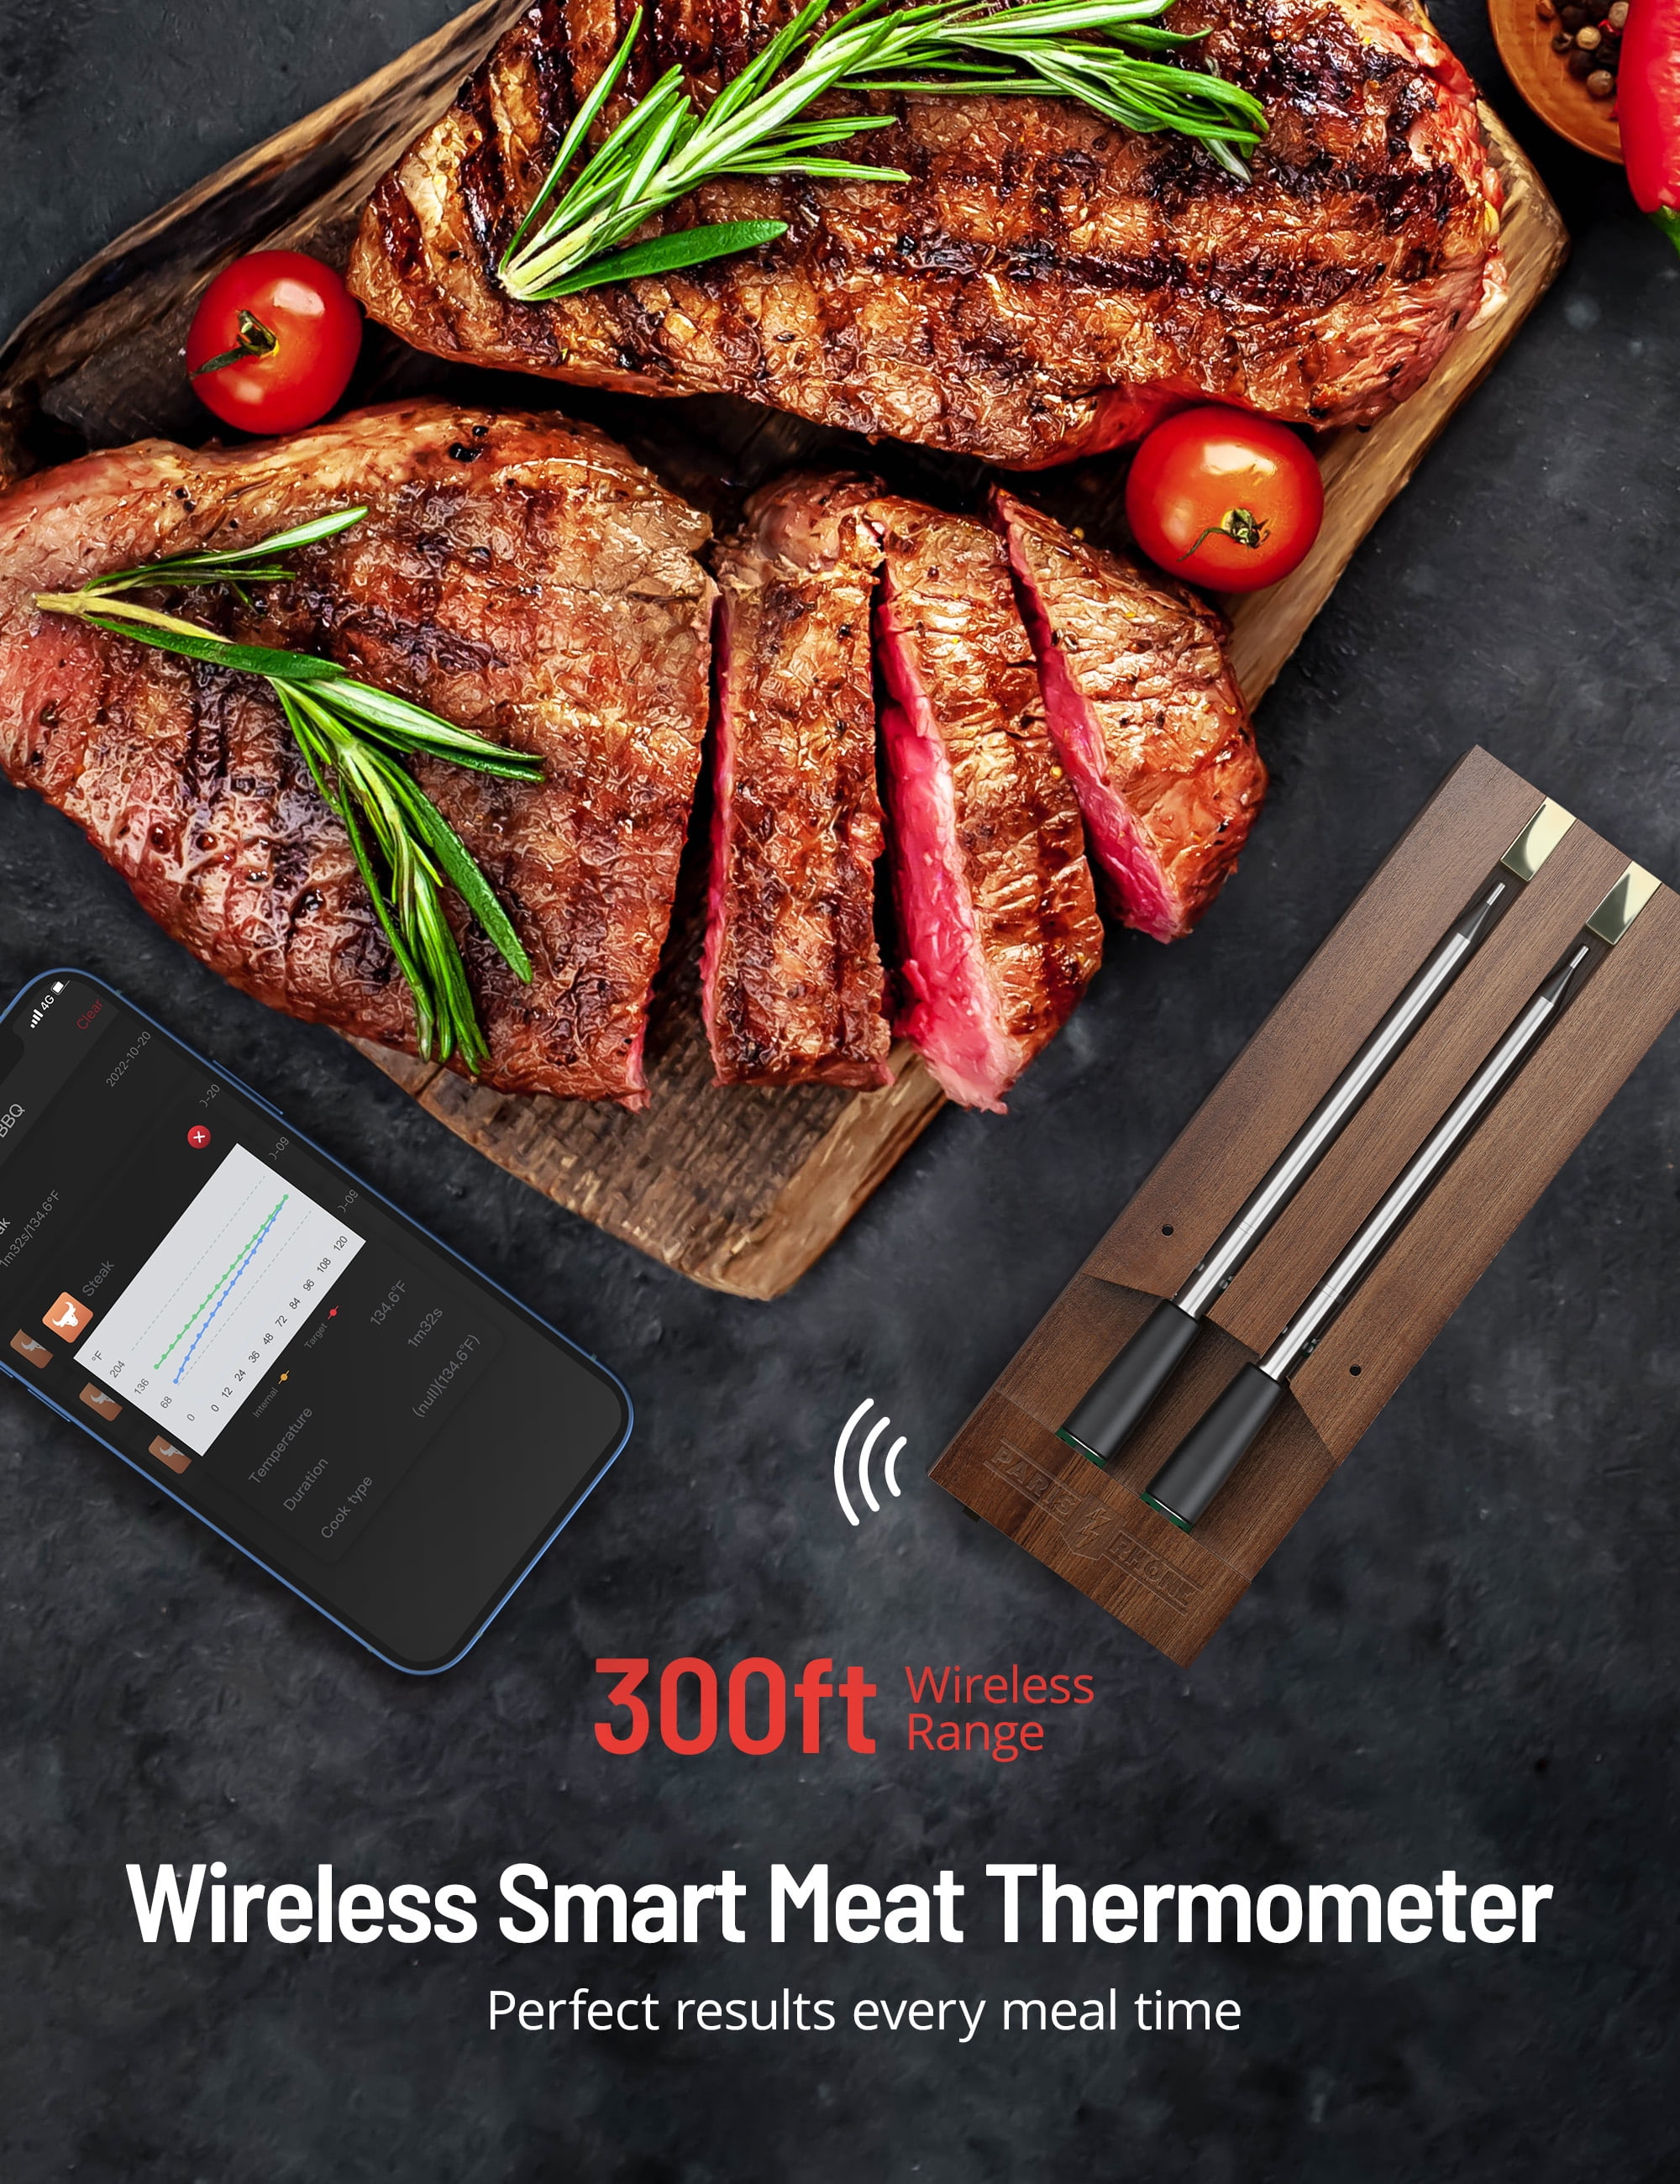 Wireless Meat Thermometer, 165ft Wireless Range Digital Meat Thermometer,  Smart App Control, Ultra-Sensitive Food Thermometer with Thinner Probe for